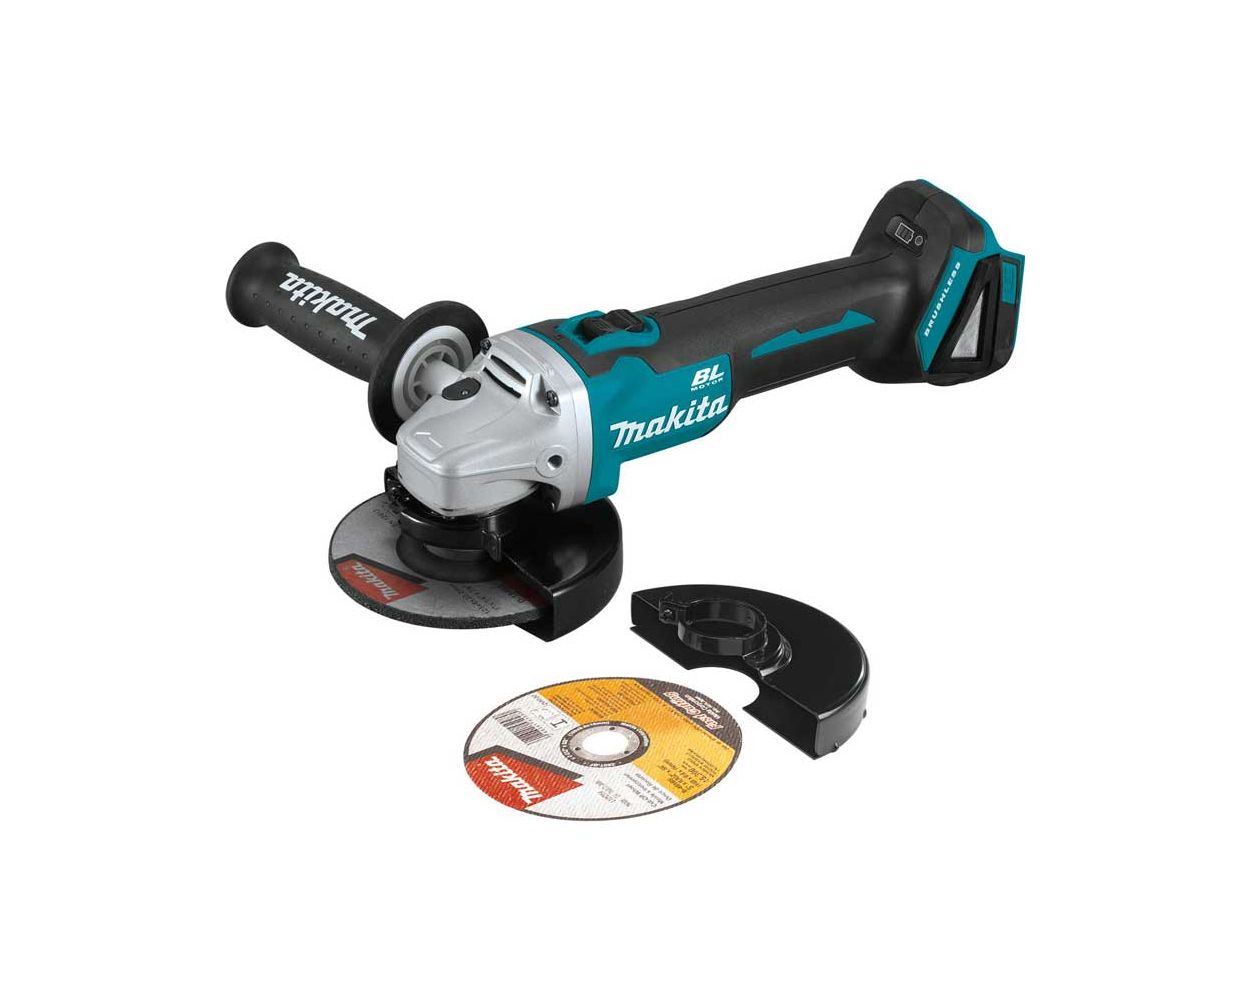 Makita XAG09Z 18V LXT Lithium-Ion Brushless Cordless 4-1/2/5 Cut-Off/Angle Grinder, Tool Only